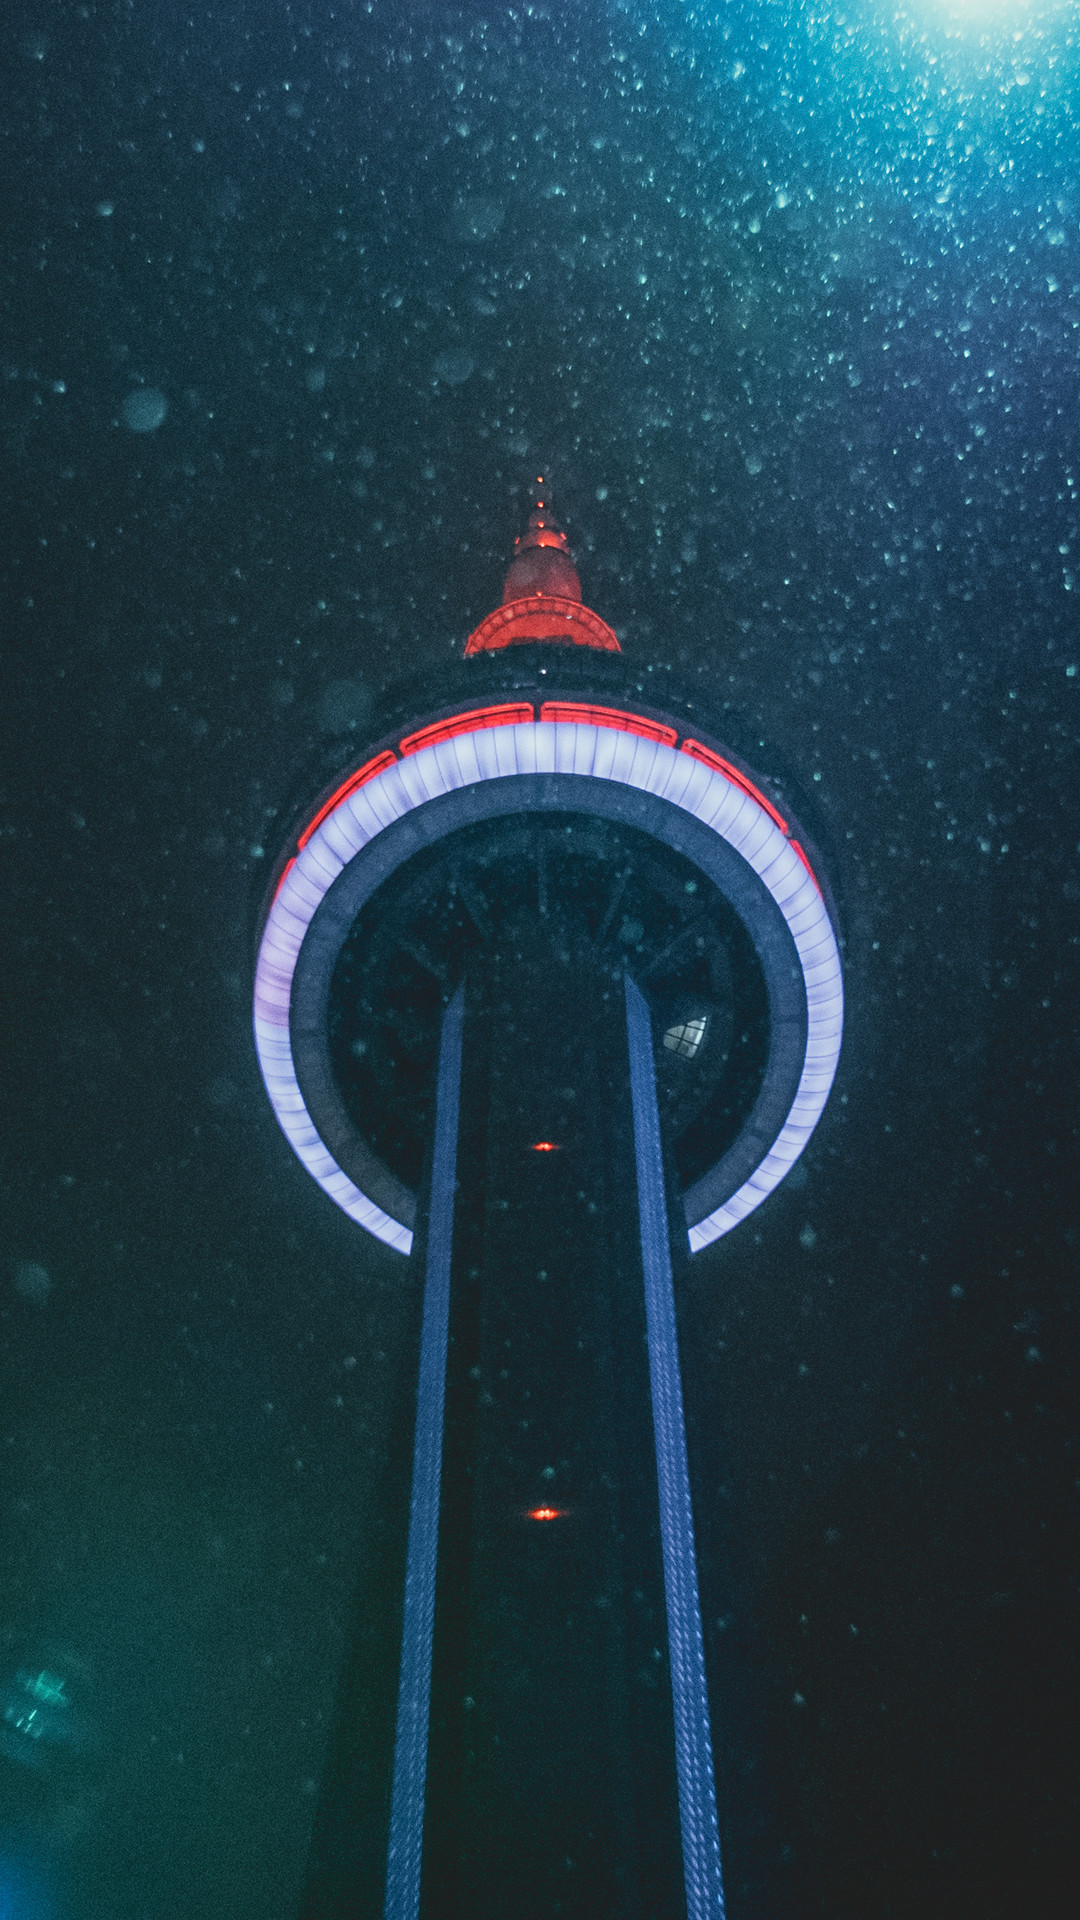 1080x1920 Collection of my Toronto photos as Phone wallpapers